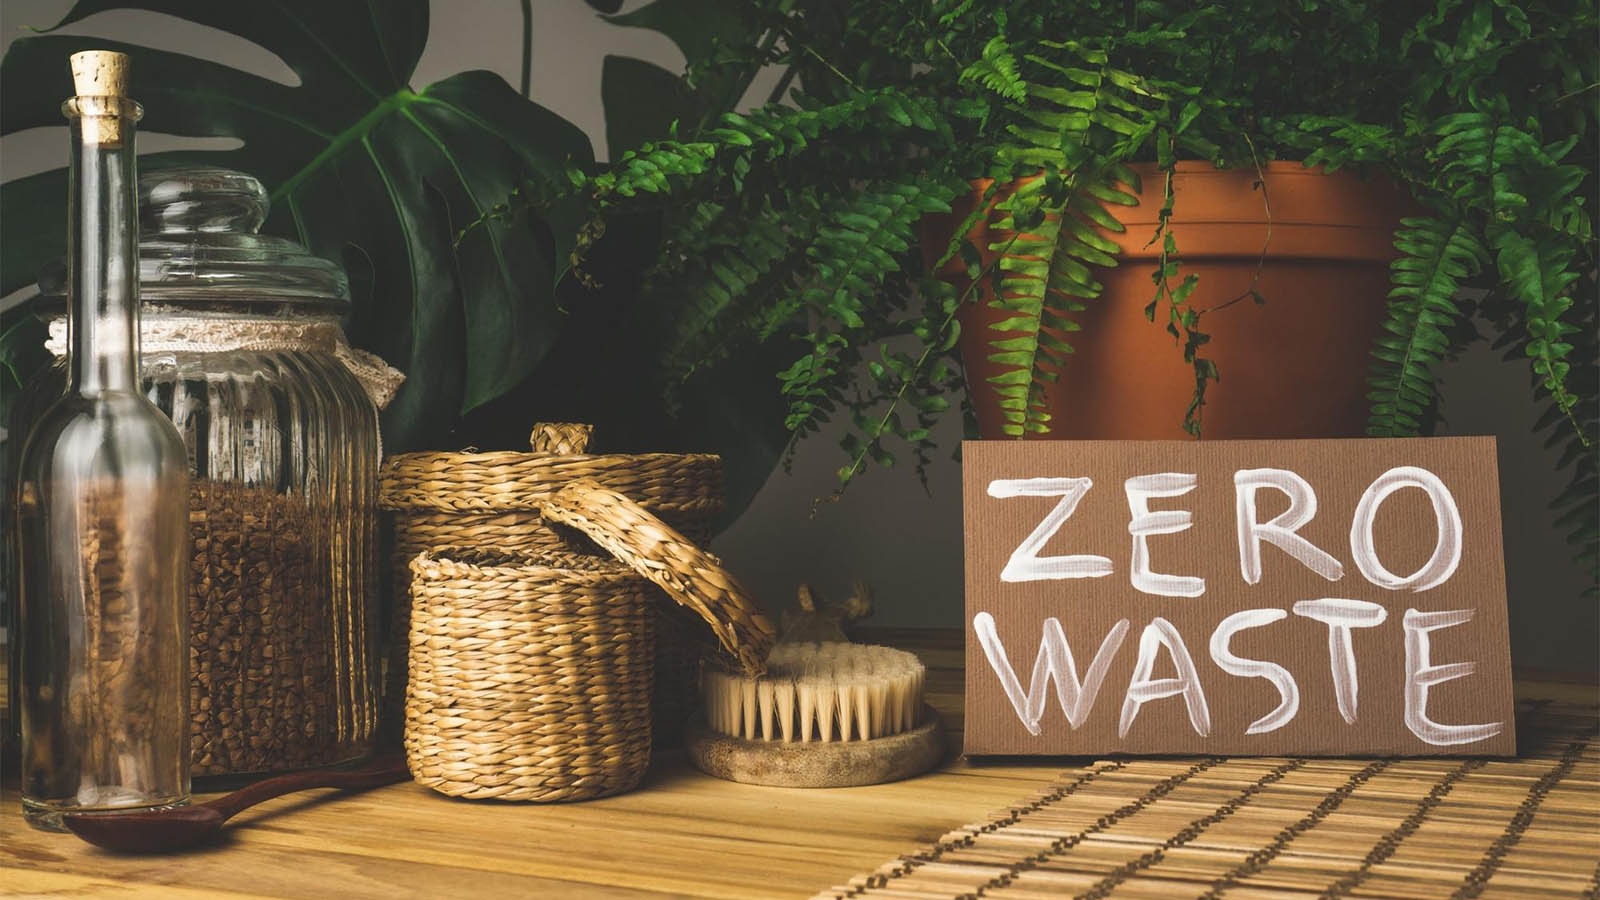 1000+ Zero Waste Pictures | Download Free Images on Unsplash